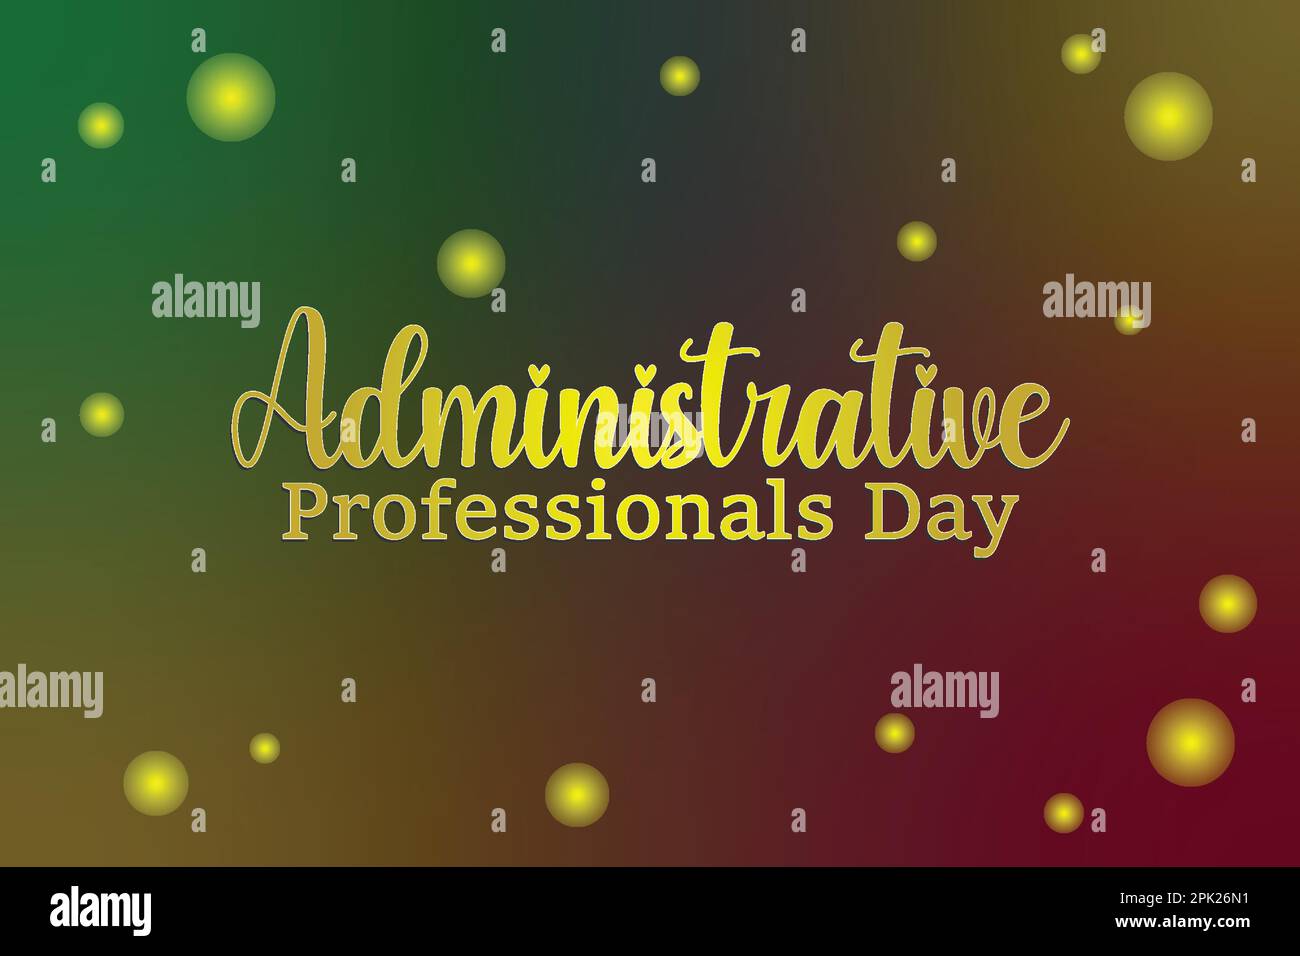 Administrative Professionals' Day, Appreciation template for banner, card, poster, logo, modern background illustration Stock Vector